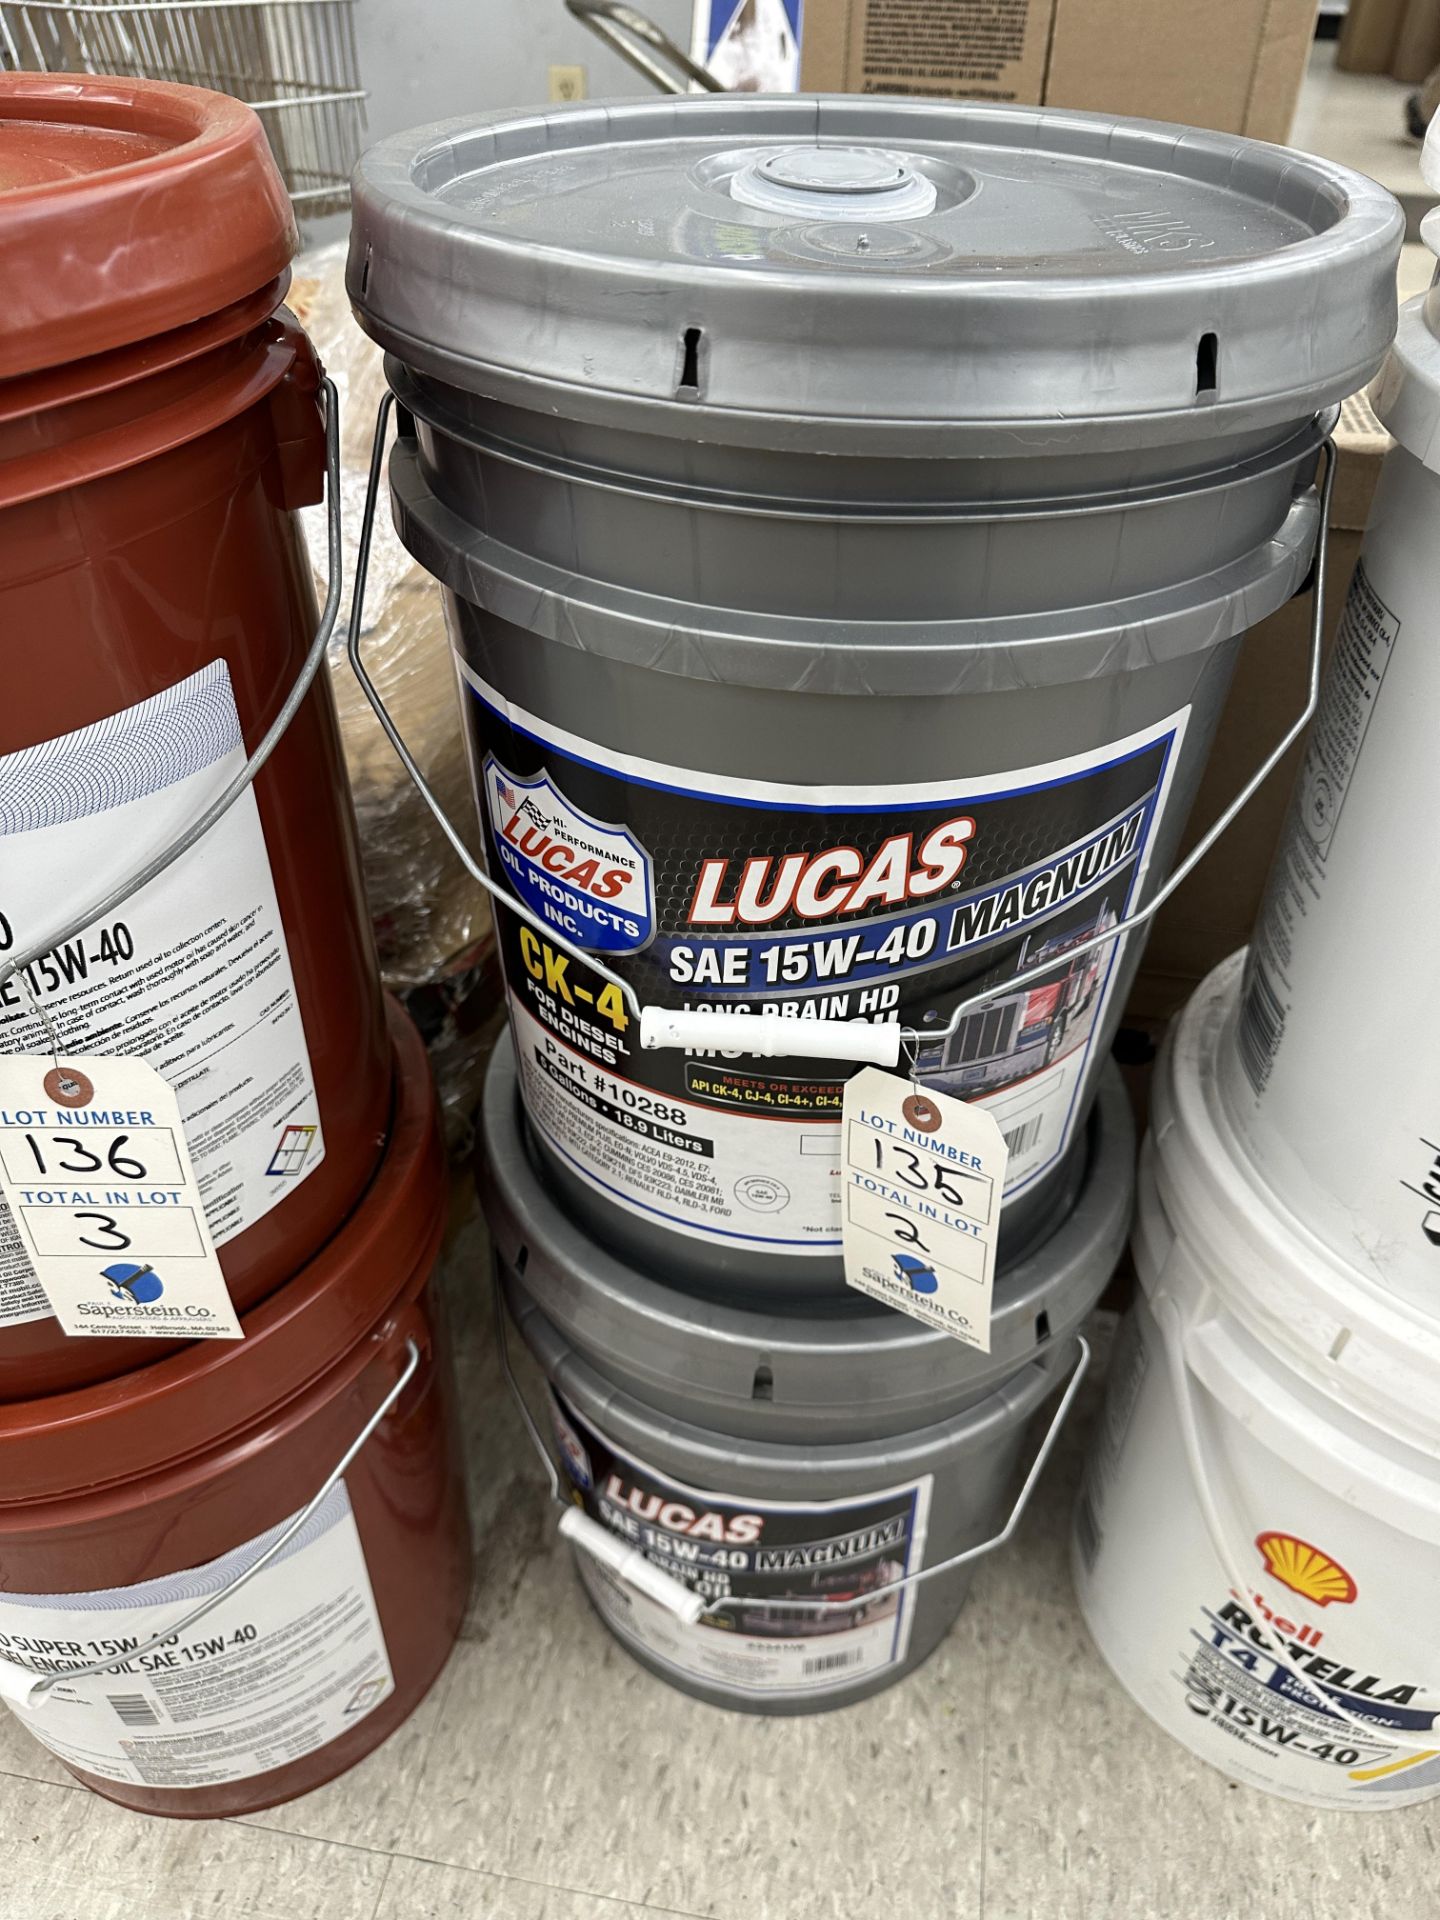 (2) Lucas CK4 15W-40 5 Gallon Pail of Motor Oil (BEING SOLD BY THE Pail )